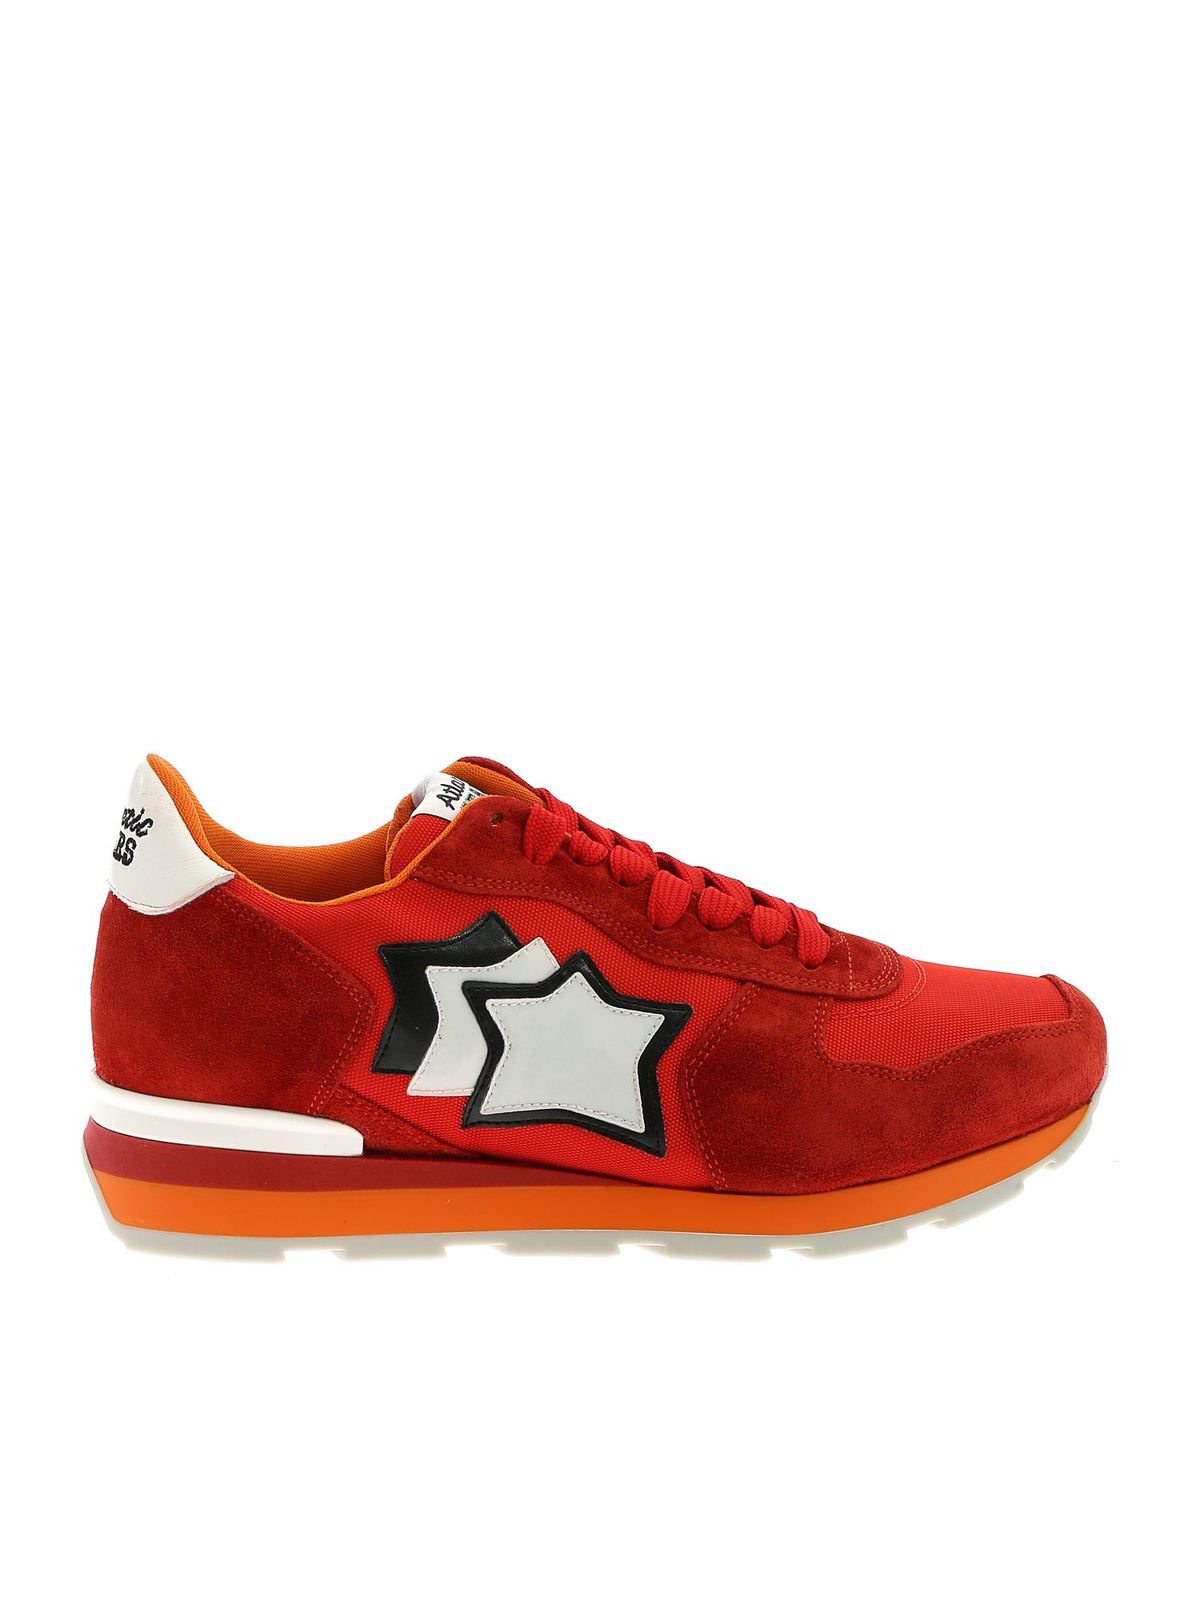 Trainers Atlantic Stars - Antares sneakers in red and orange ...